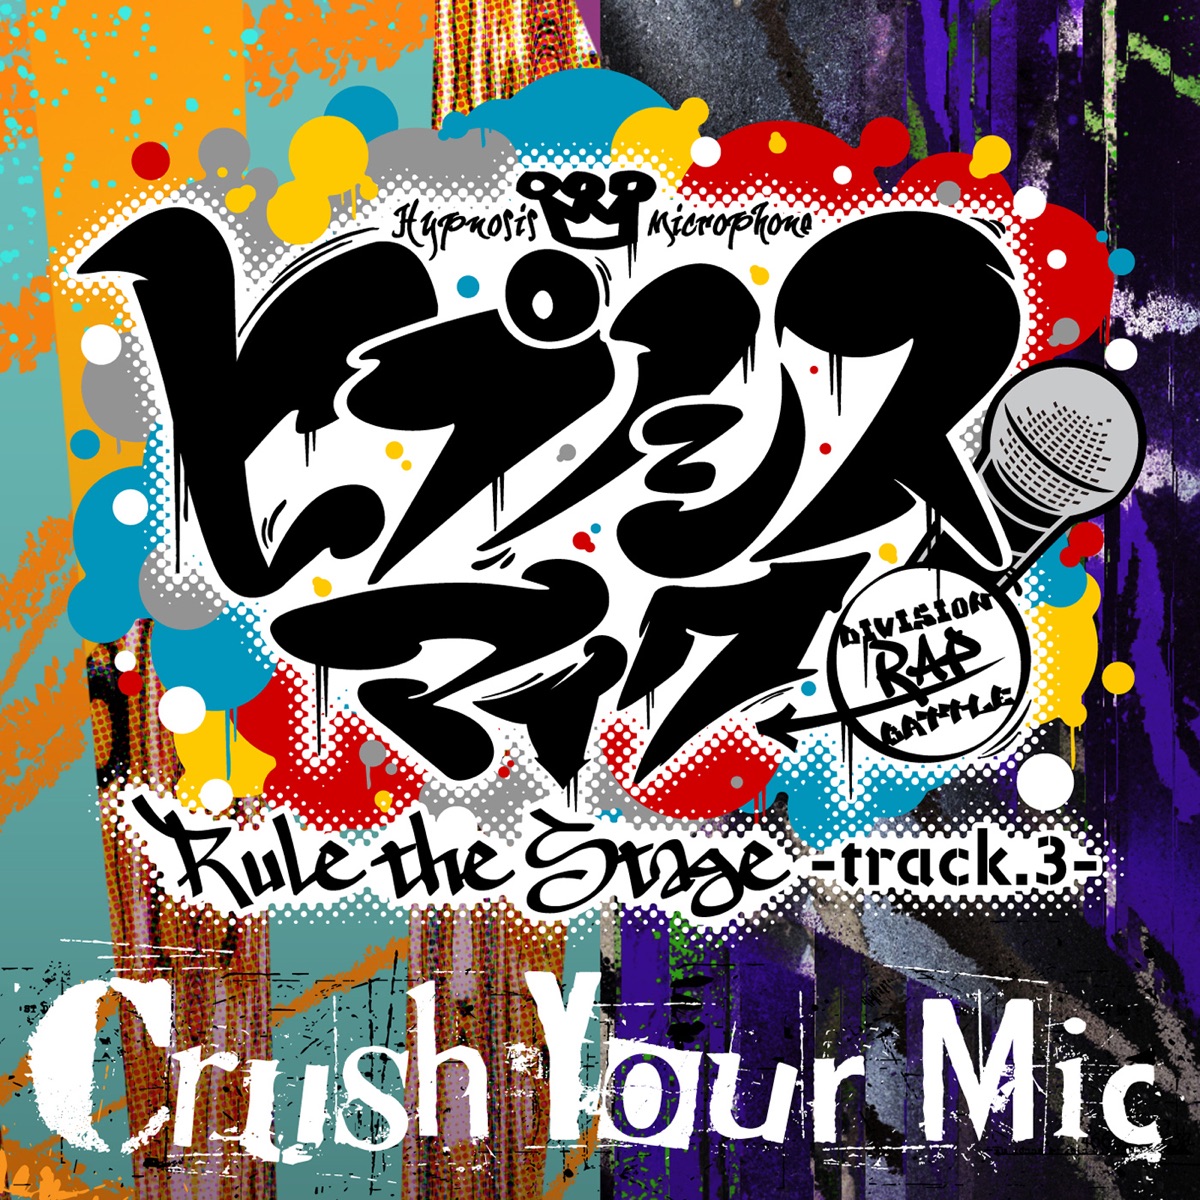 Cover art for『Hypnosis Mic -Division Rap Battle- Rule the Stage (Dotsuitare Honpo・Bad Ass Temple) - Crush Your Mic -Rule the Stage track.3-』from the release『Crush Your Mic -Rule the Stage track.3-